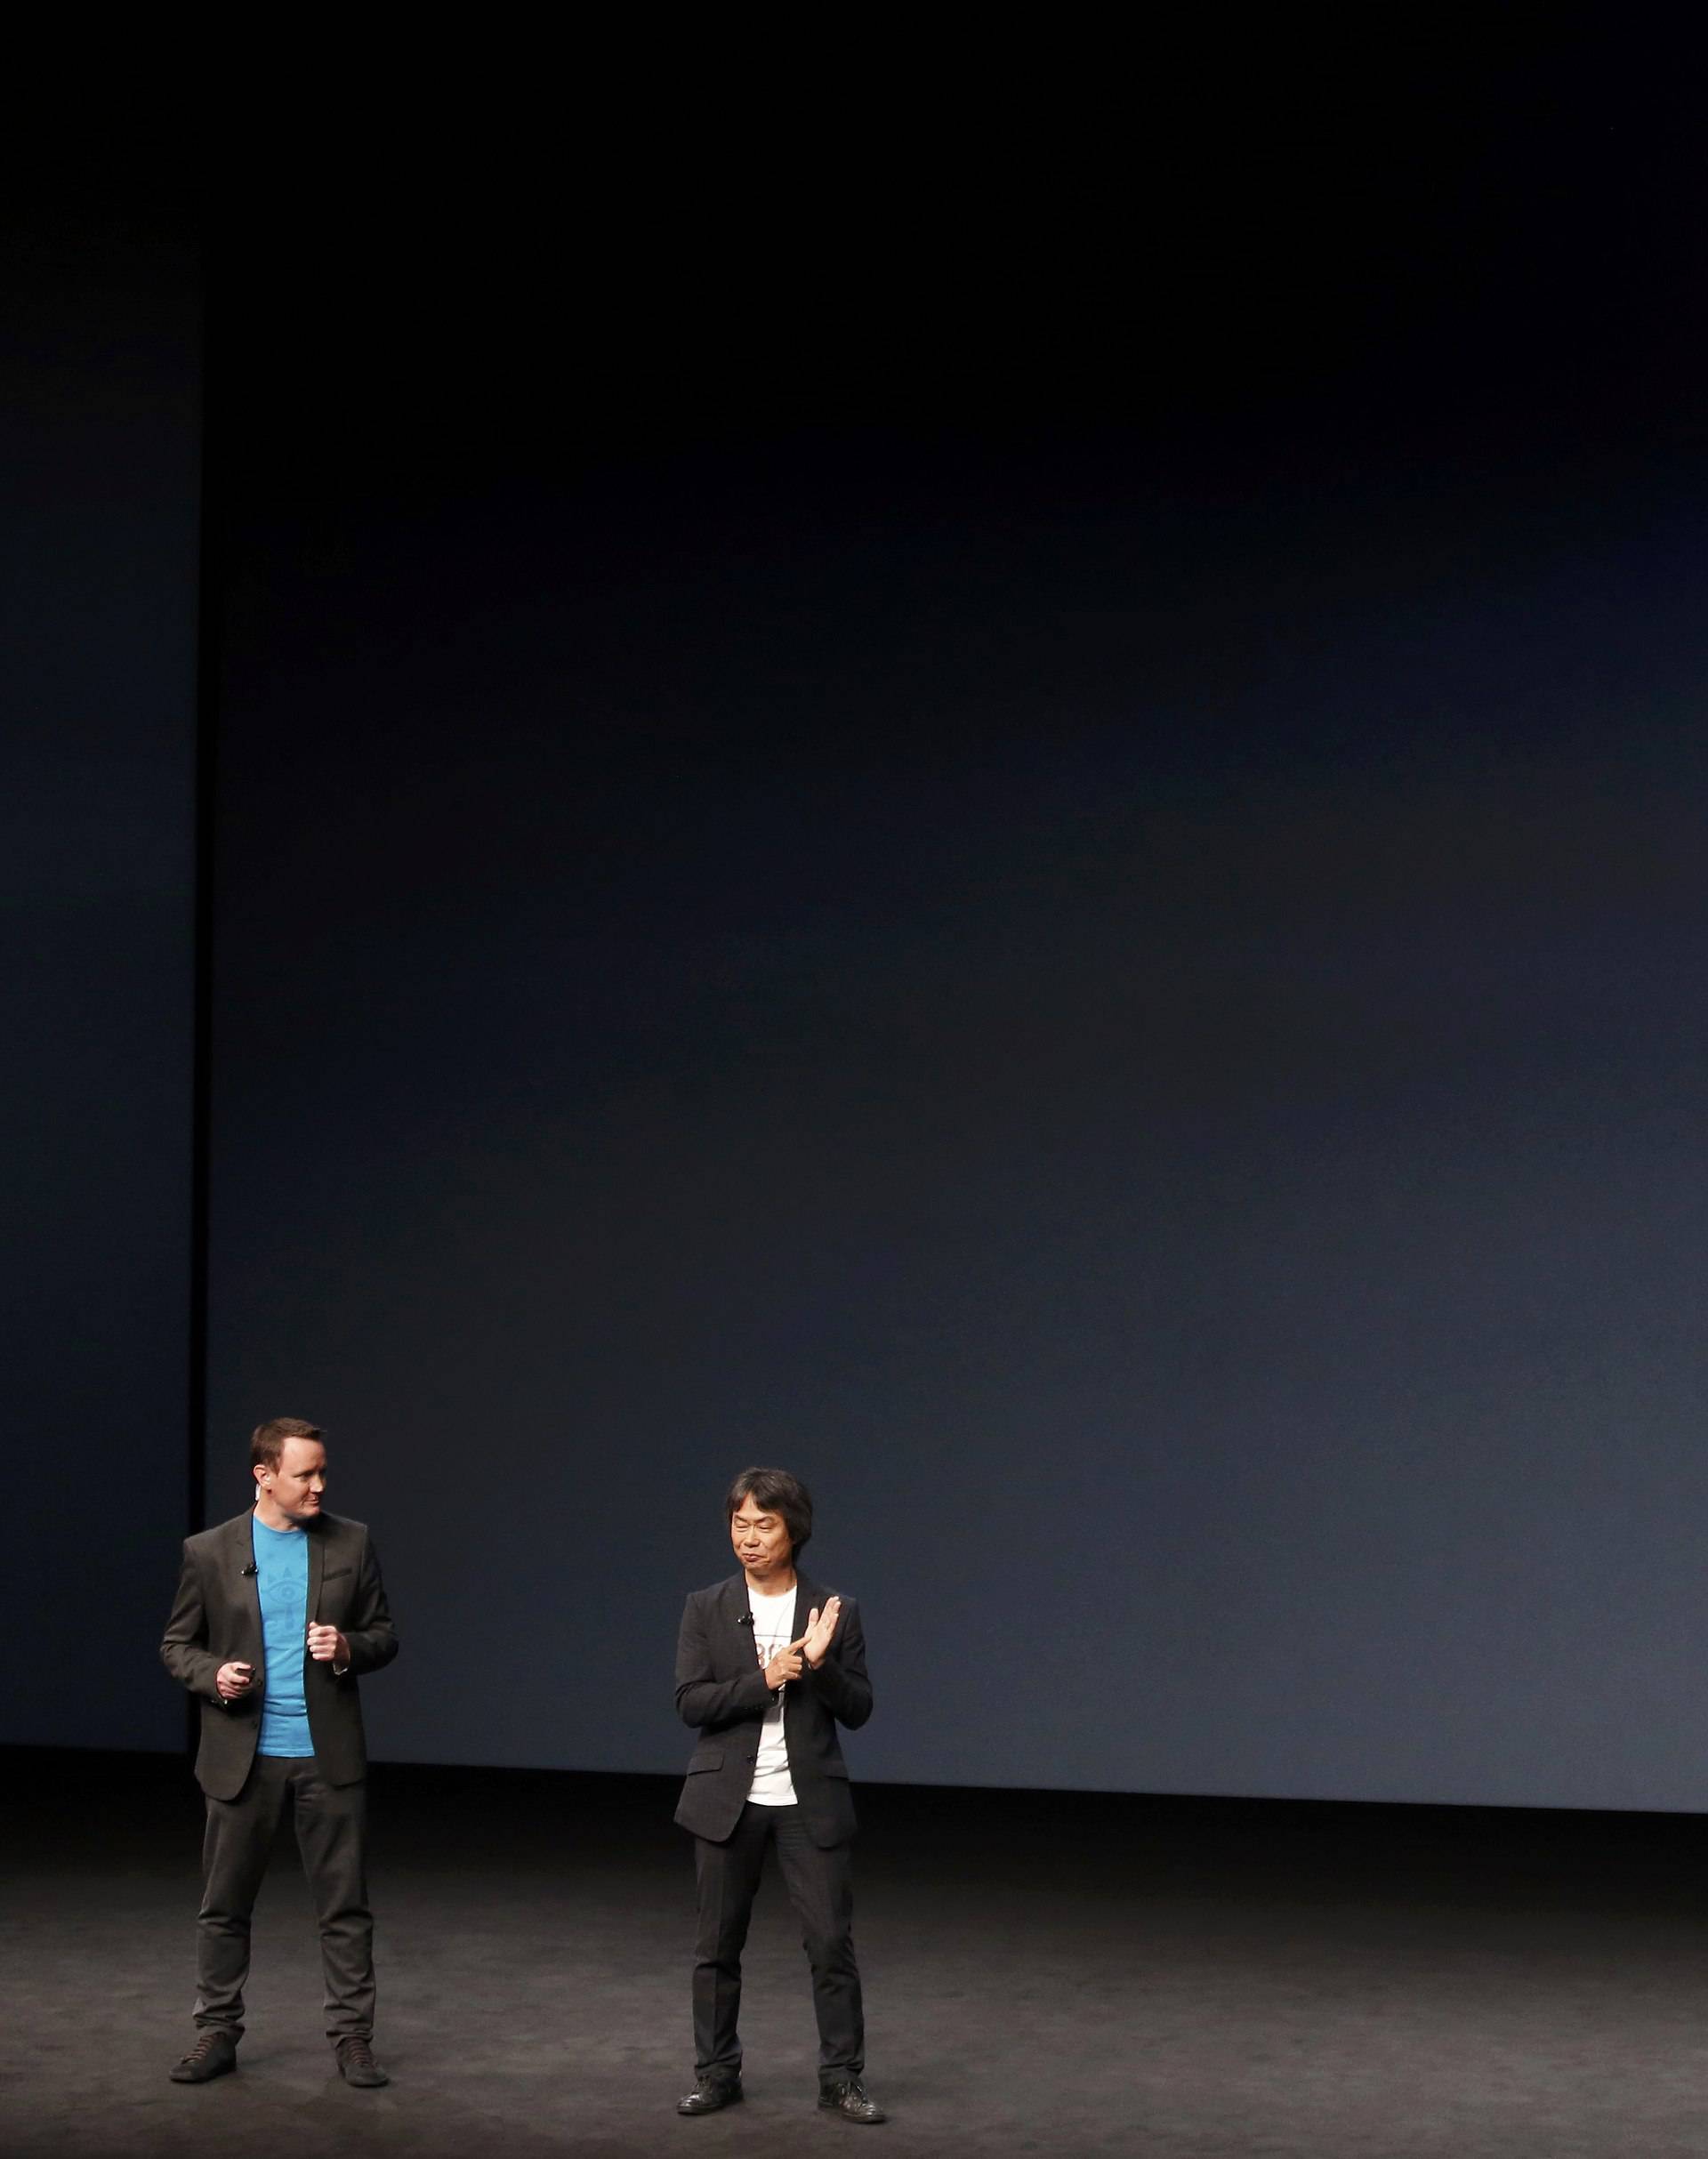 Shigeru Miyamoto announces a Mario Bros game for the iPhone during an Apple media event in San Francisco